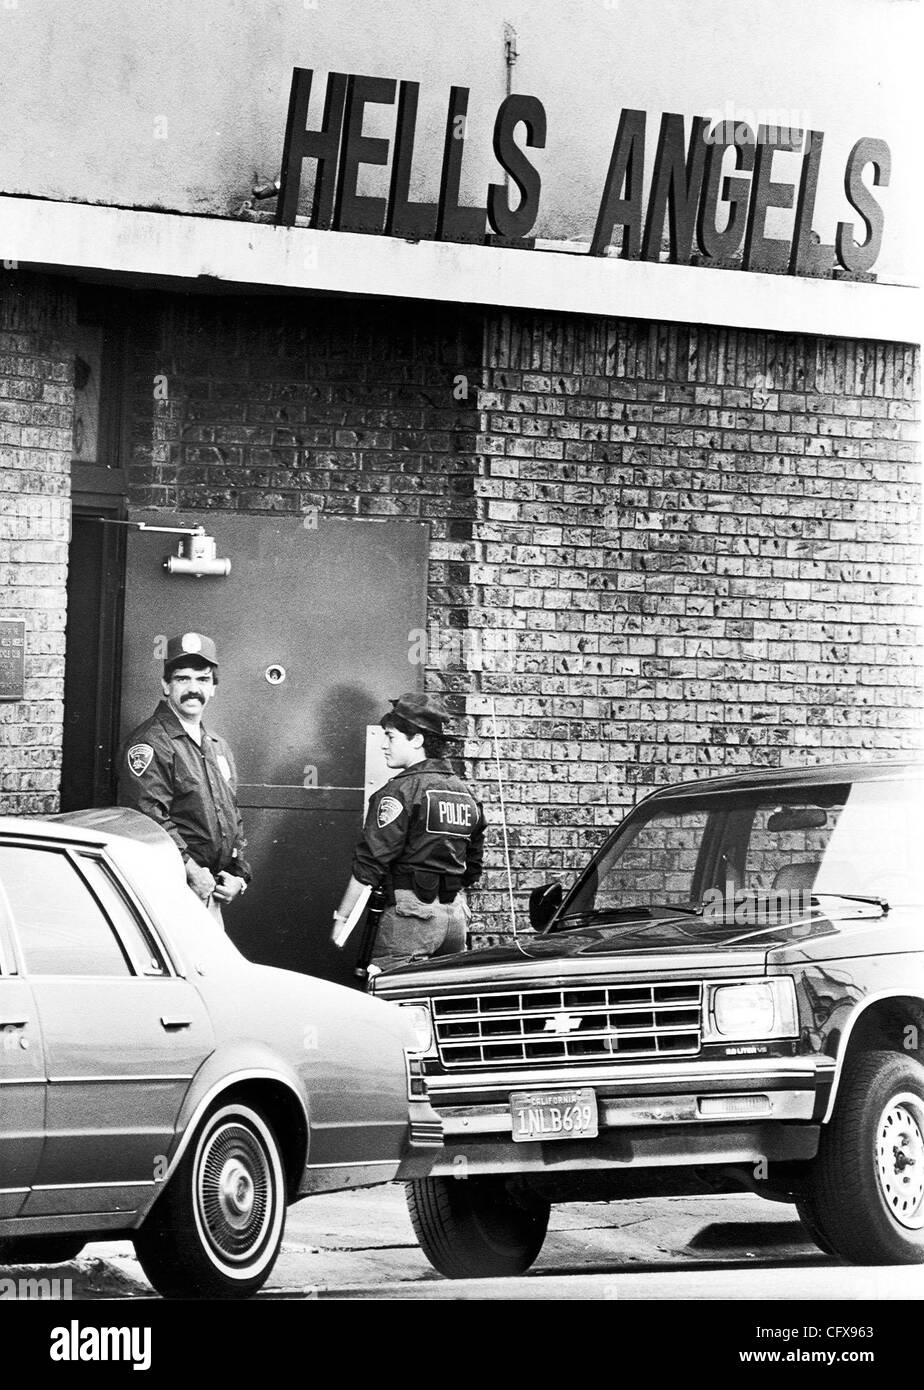 Apr 05, 2007 - Oakland, CA, USA - Hell's Angels club on Foothill and 40th Ave. in Oakland during a raid in 1987. (Credit Image: © Oakland Tribune/ZUMA Press) RESTRICTIONS: USA Tabloid RIGHTS OUT! Stock Photo